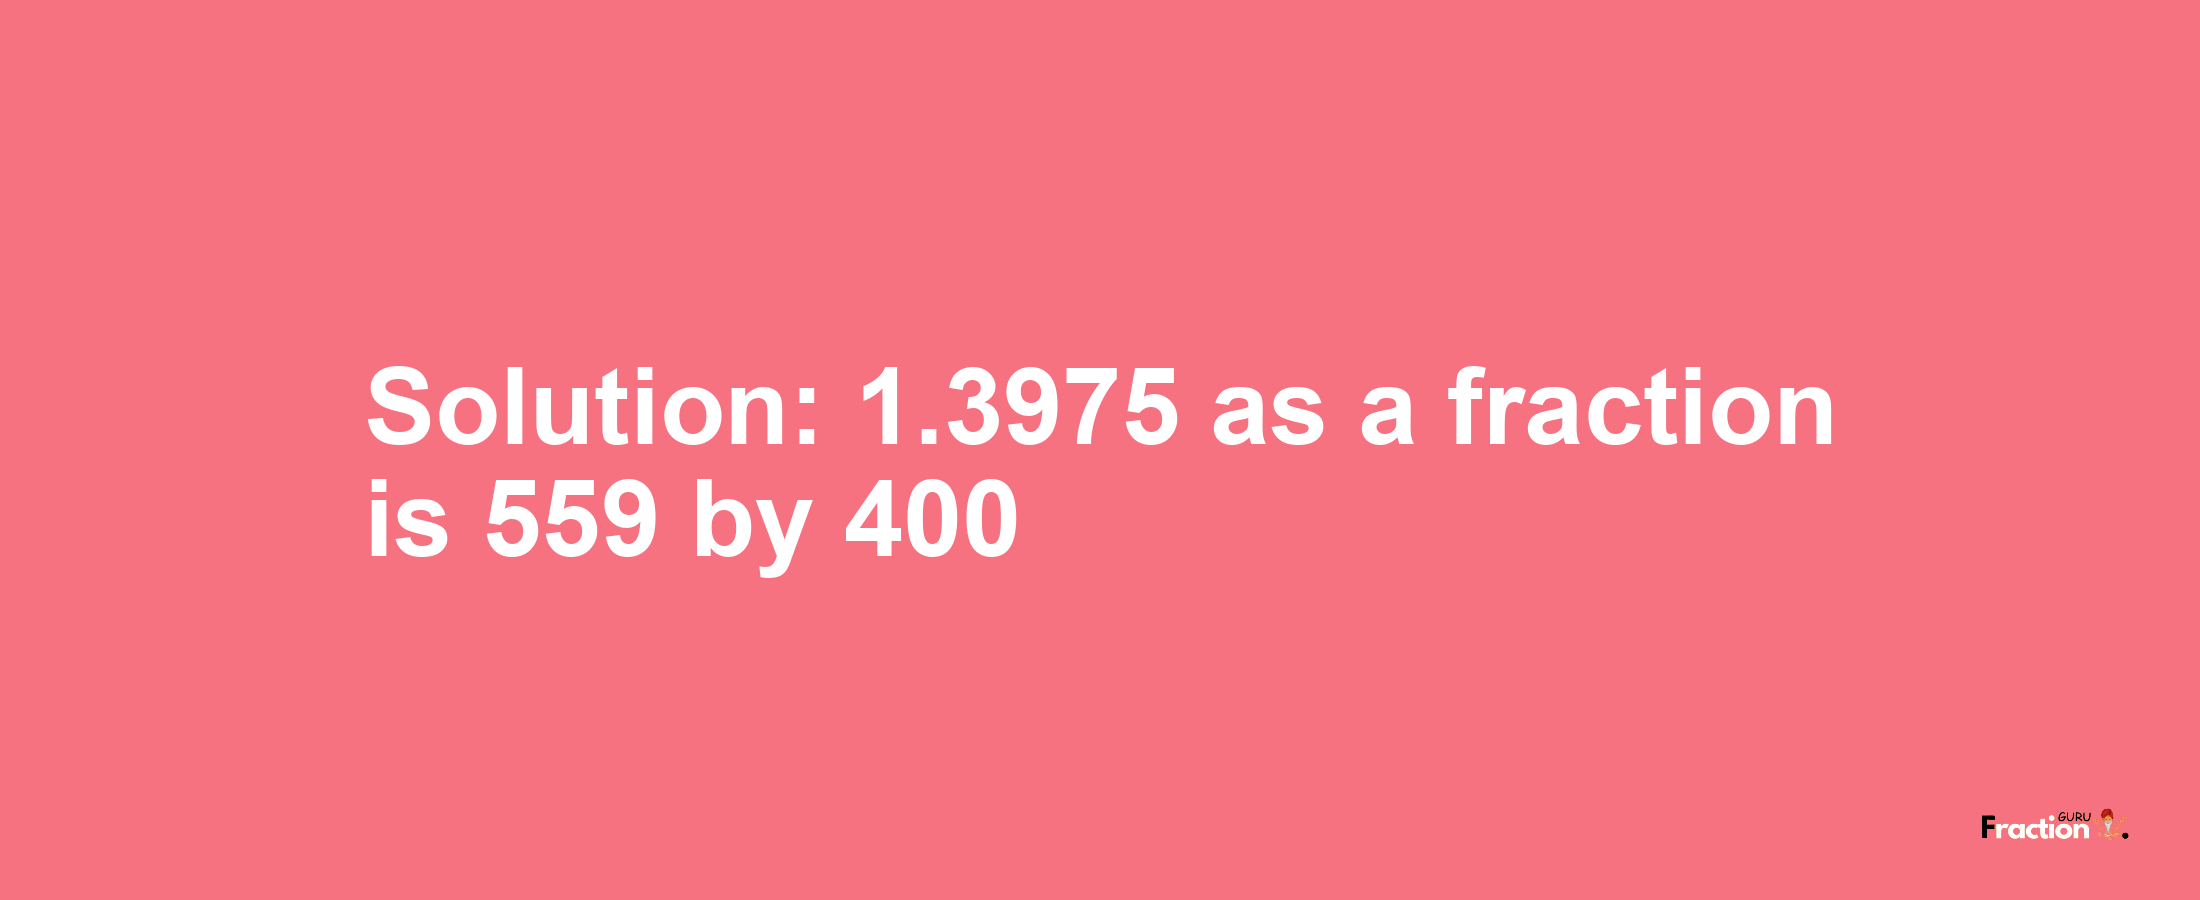 Solution:1.3975 as a fraction is 559/400